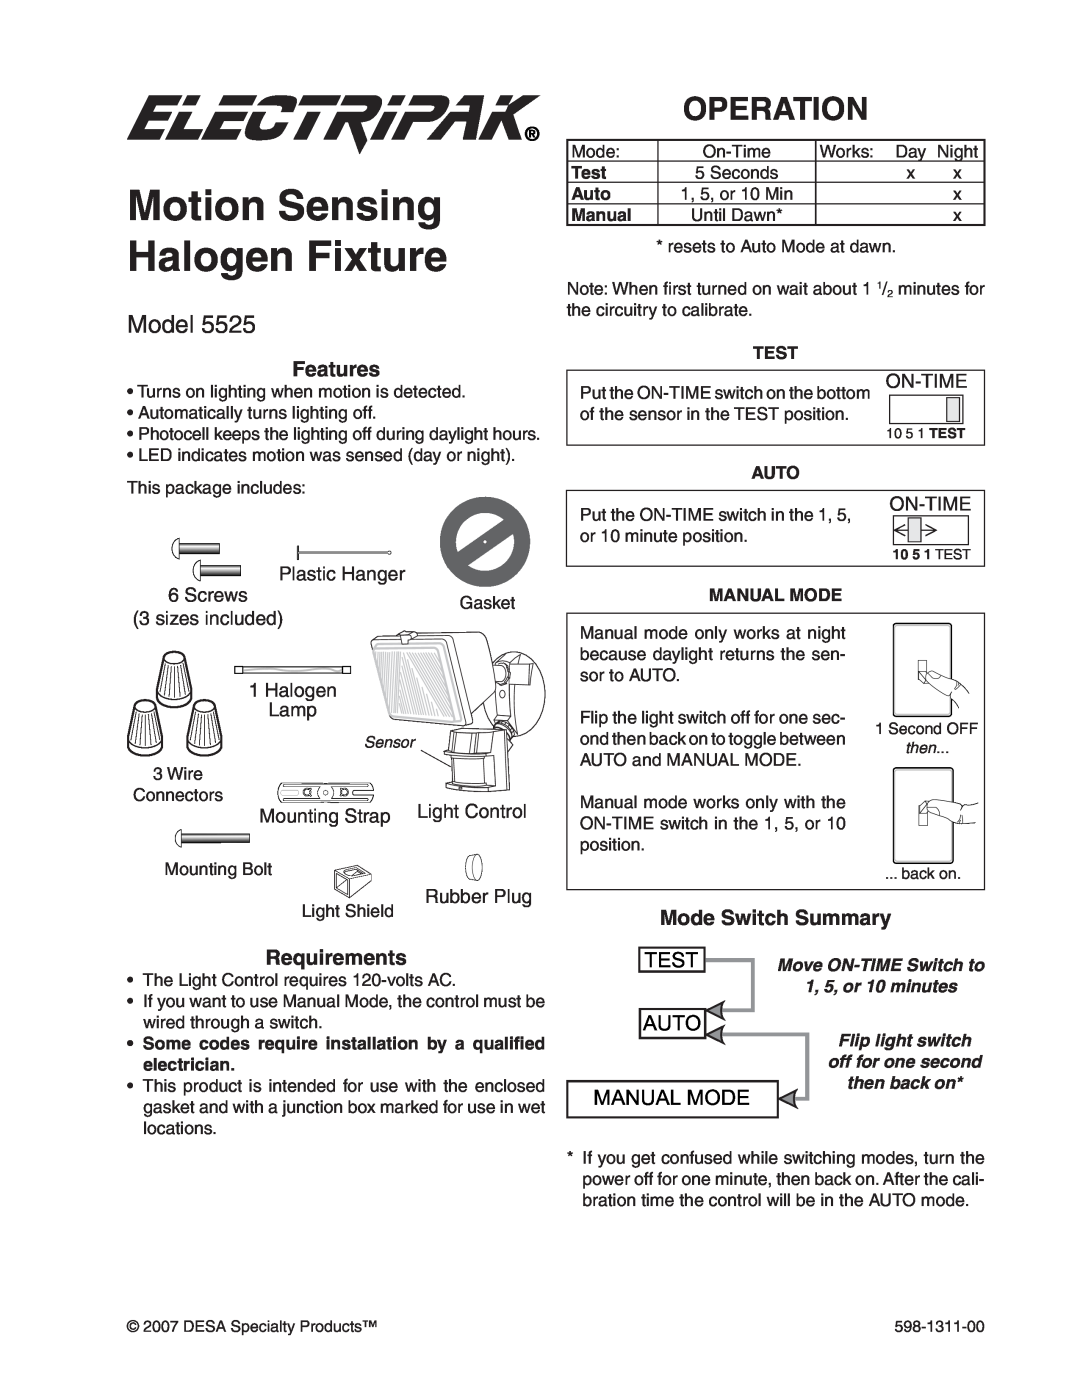 Desa 5525 manual Motion Sensing Halogen Fixture, Operation, Model, Mode Switch Summary, Test, Auto, Manual Mode, On-Time 